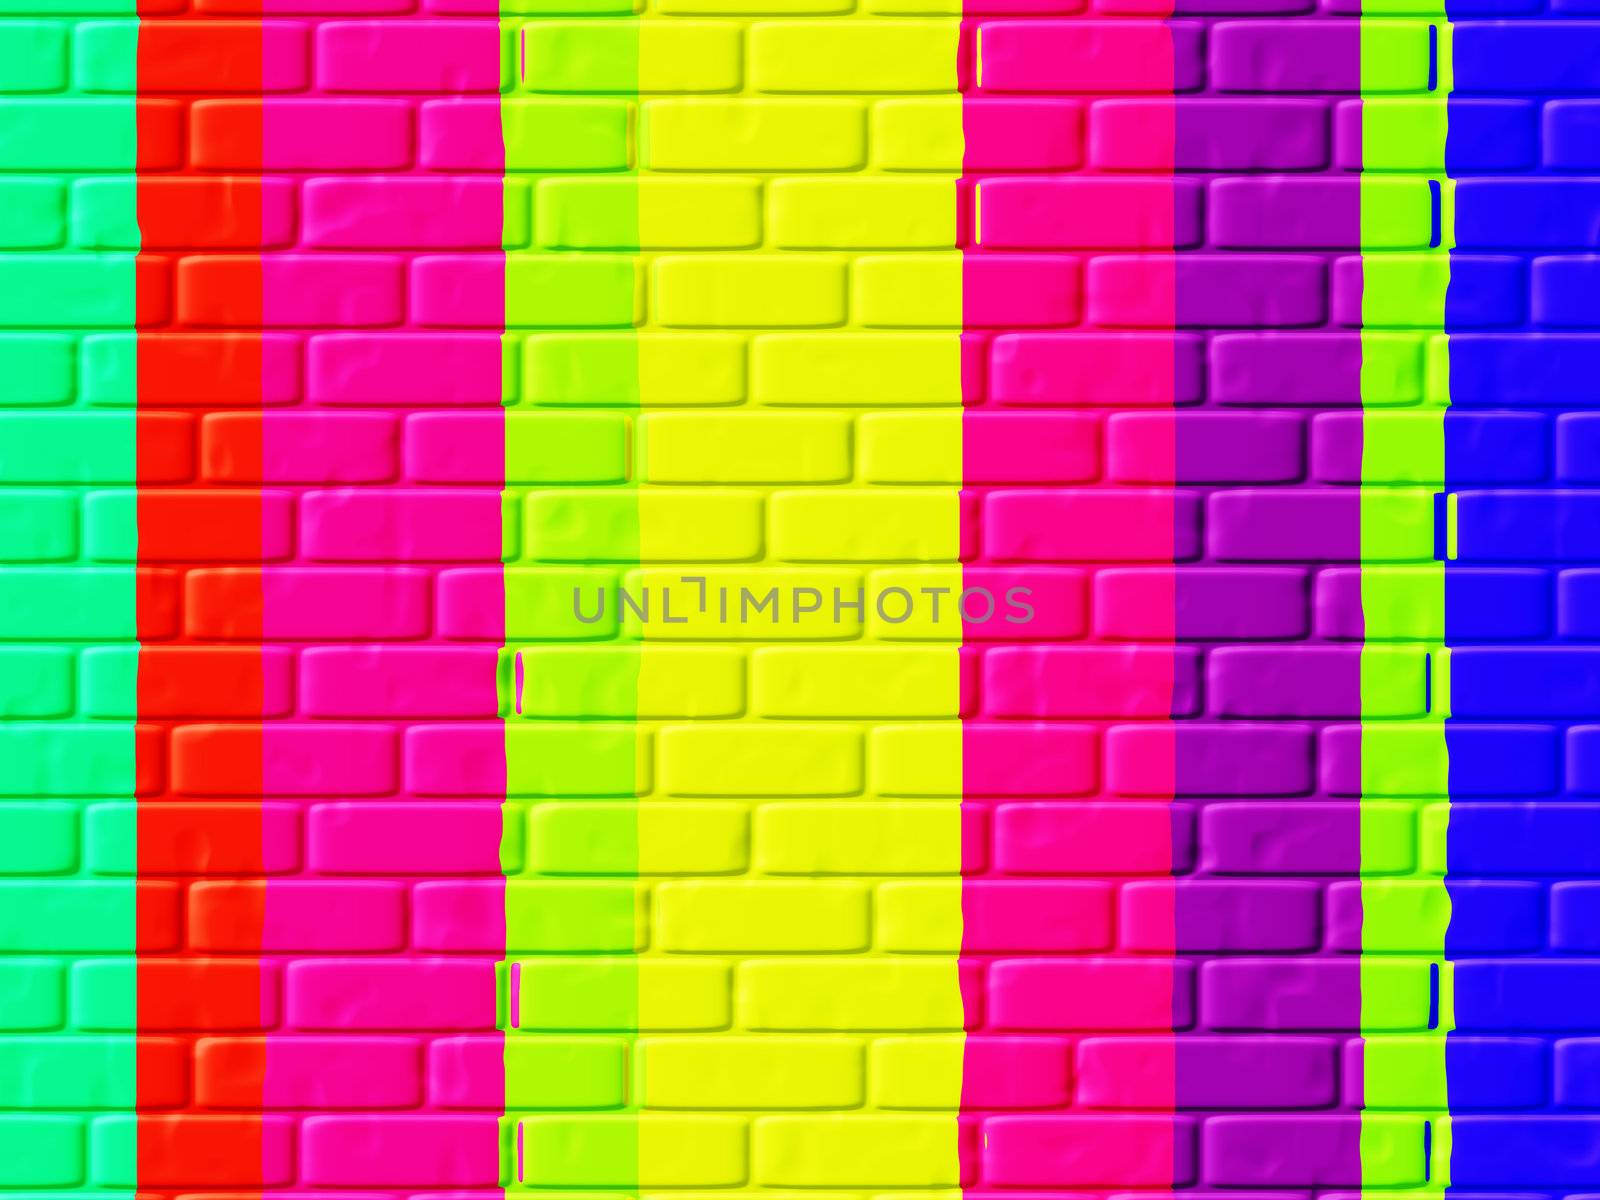 Colourful abstract brickwork pattern overlaid with vertical colour stripes and bars